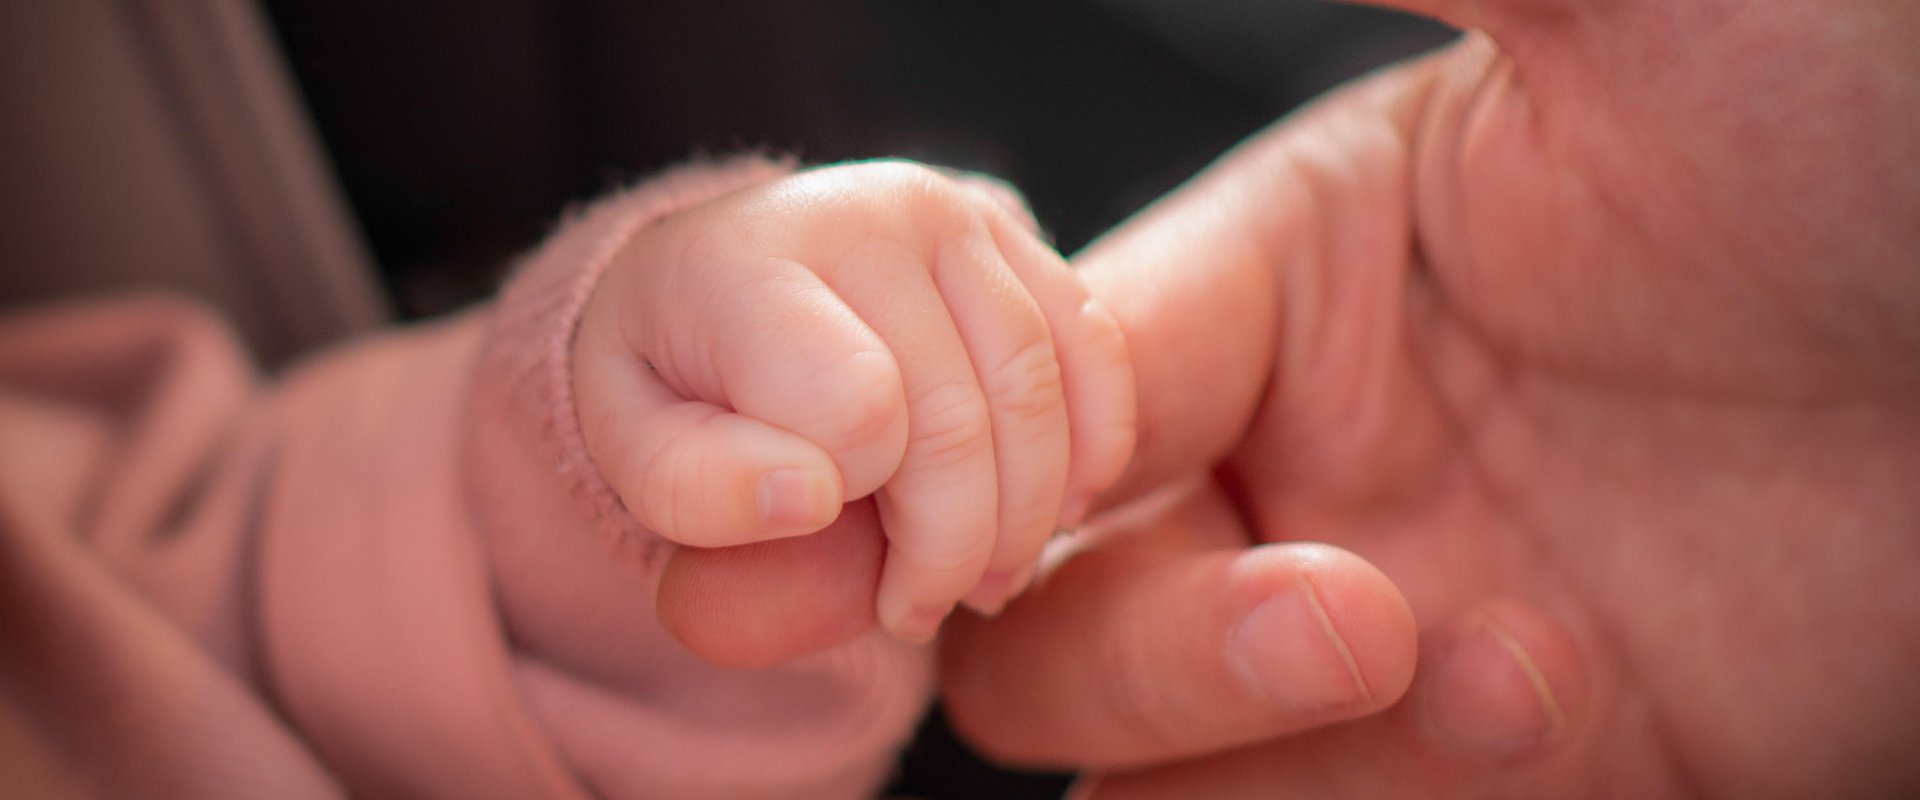 A baby holds an adult's finger in its hand.